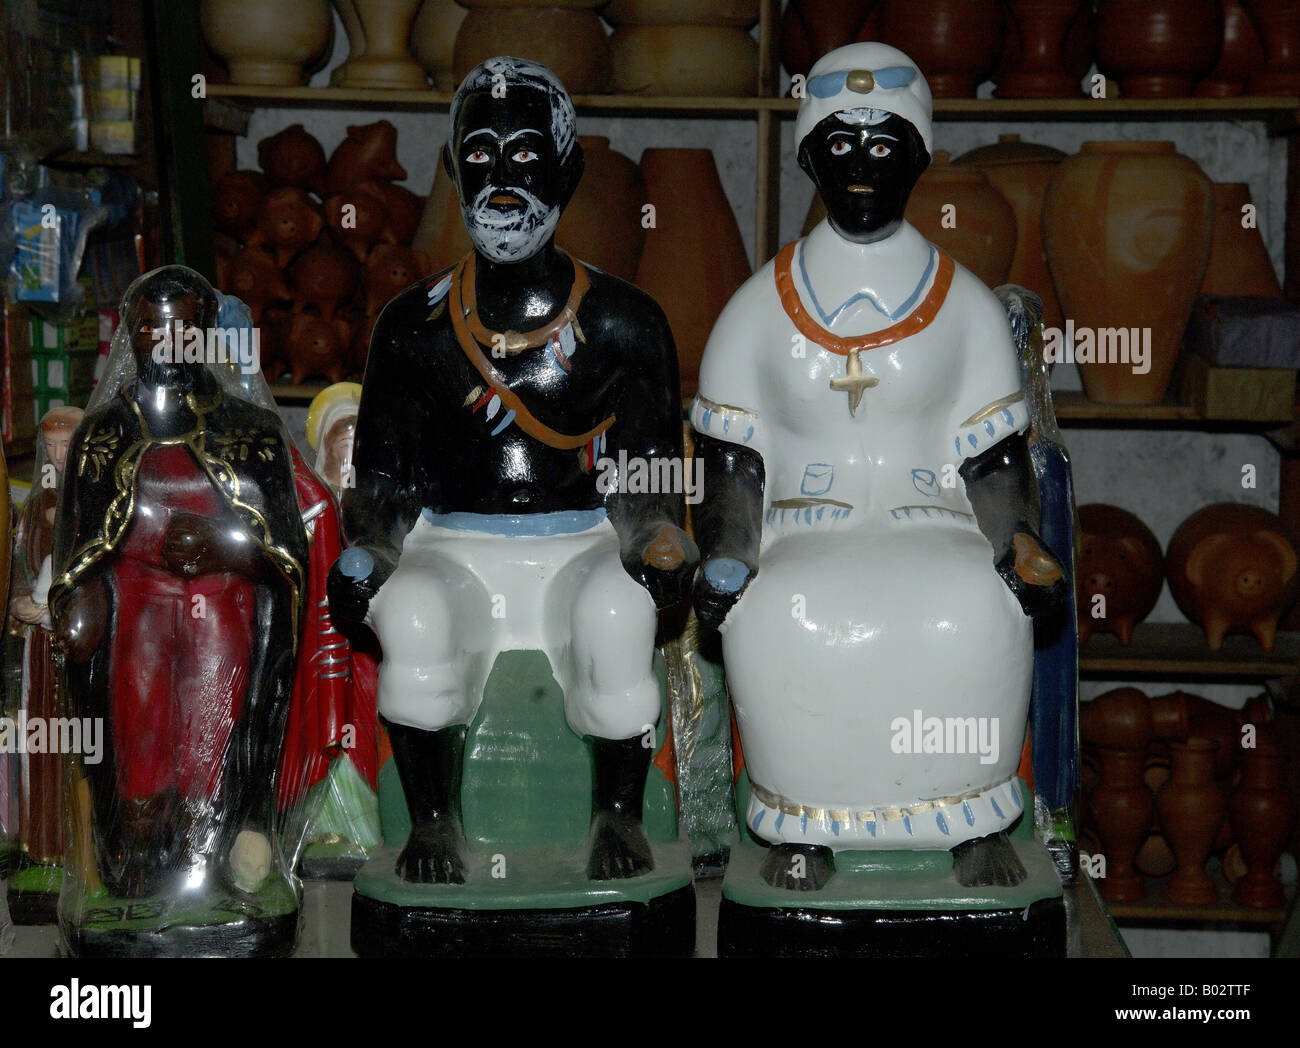 Products, artifacts of ceramic and other materials sold in the opened and stalls of Sao Joaquim market in the city of Salvador, Stock Photo